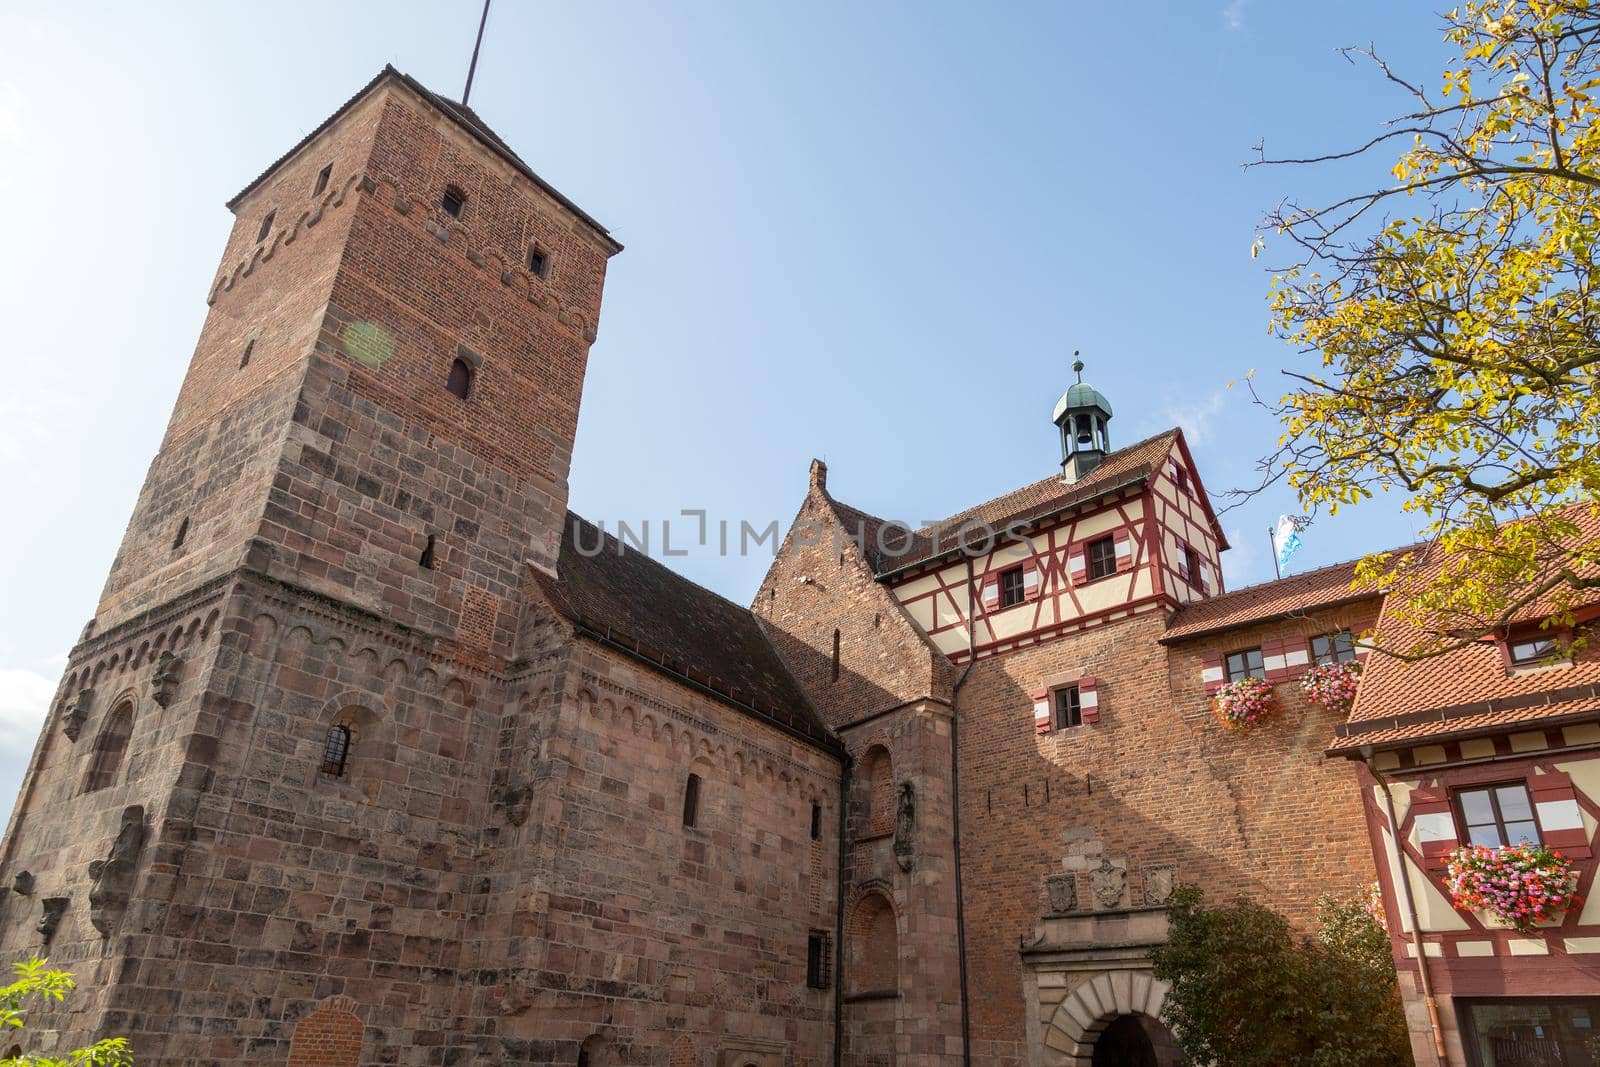 Historic wall and building of the Nuremberg castle, Bavaria, Germany by reinerc